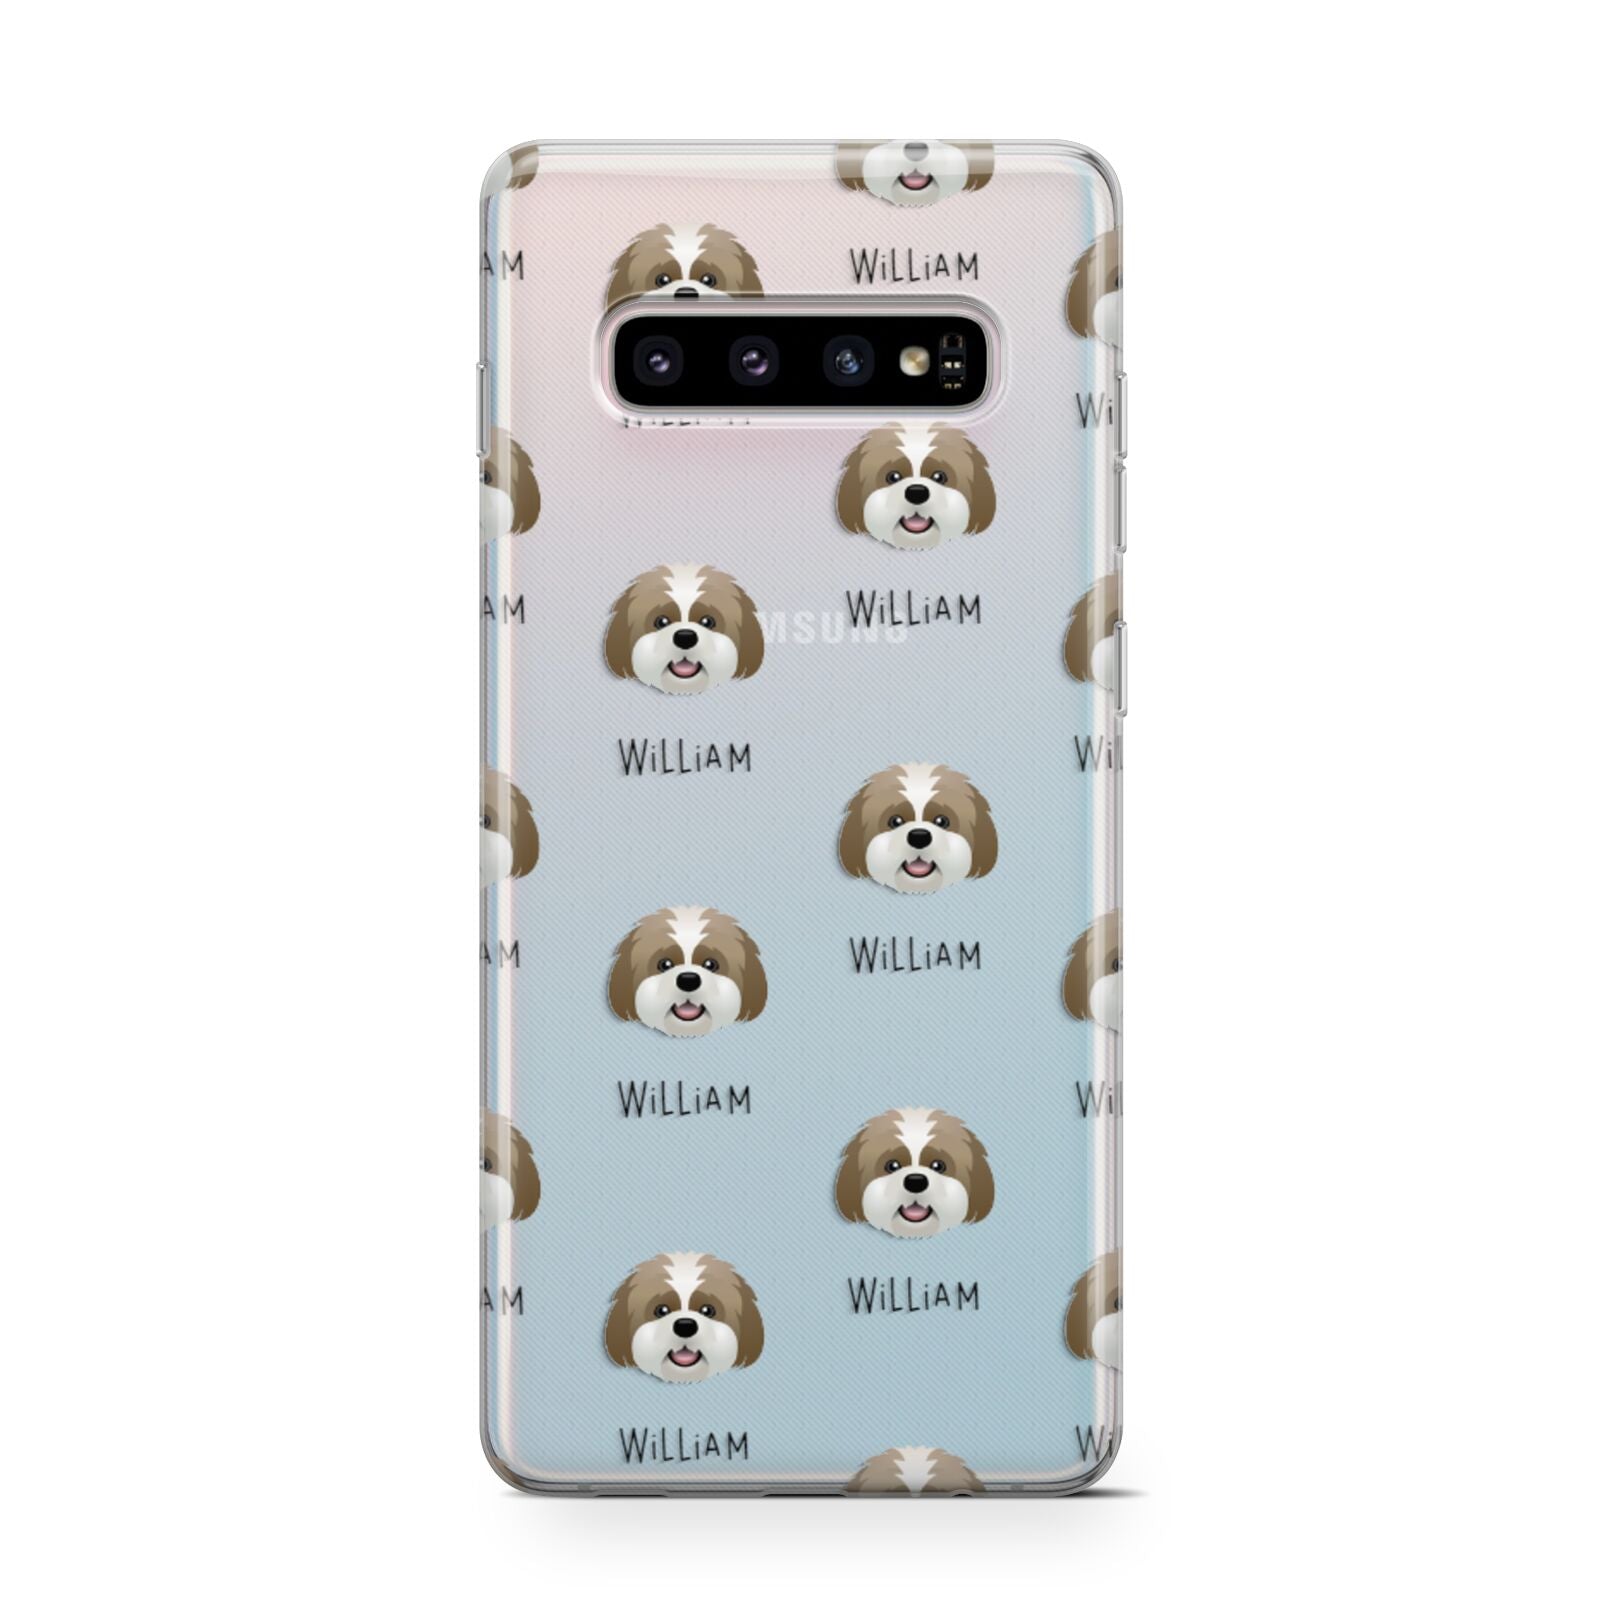 Lhatese Icon with Name Samsung Galaxy S10 Case